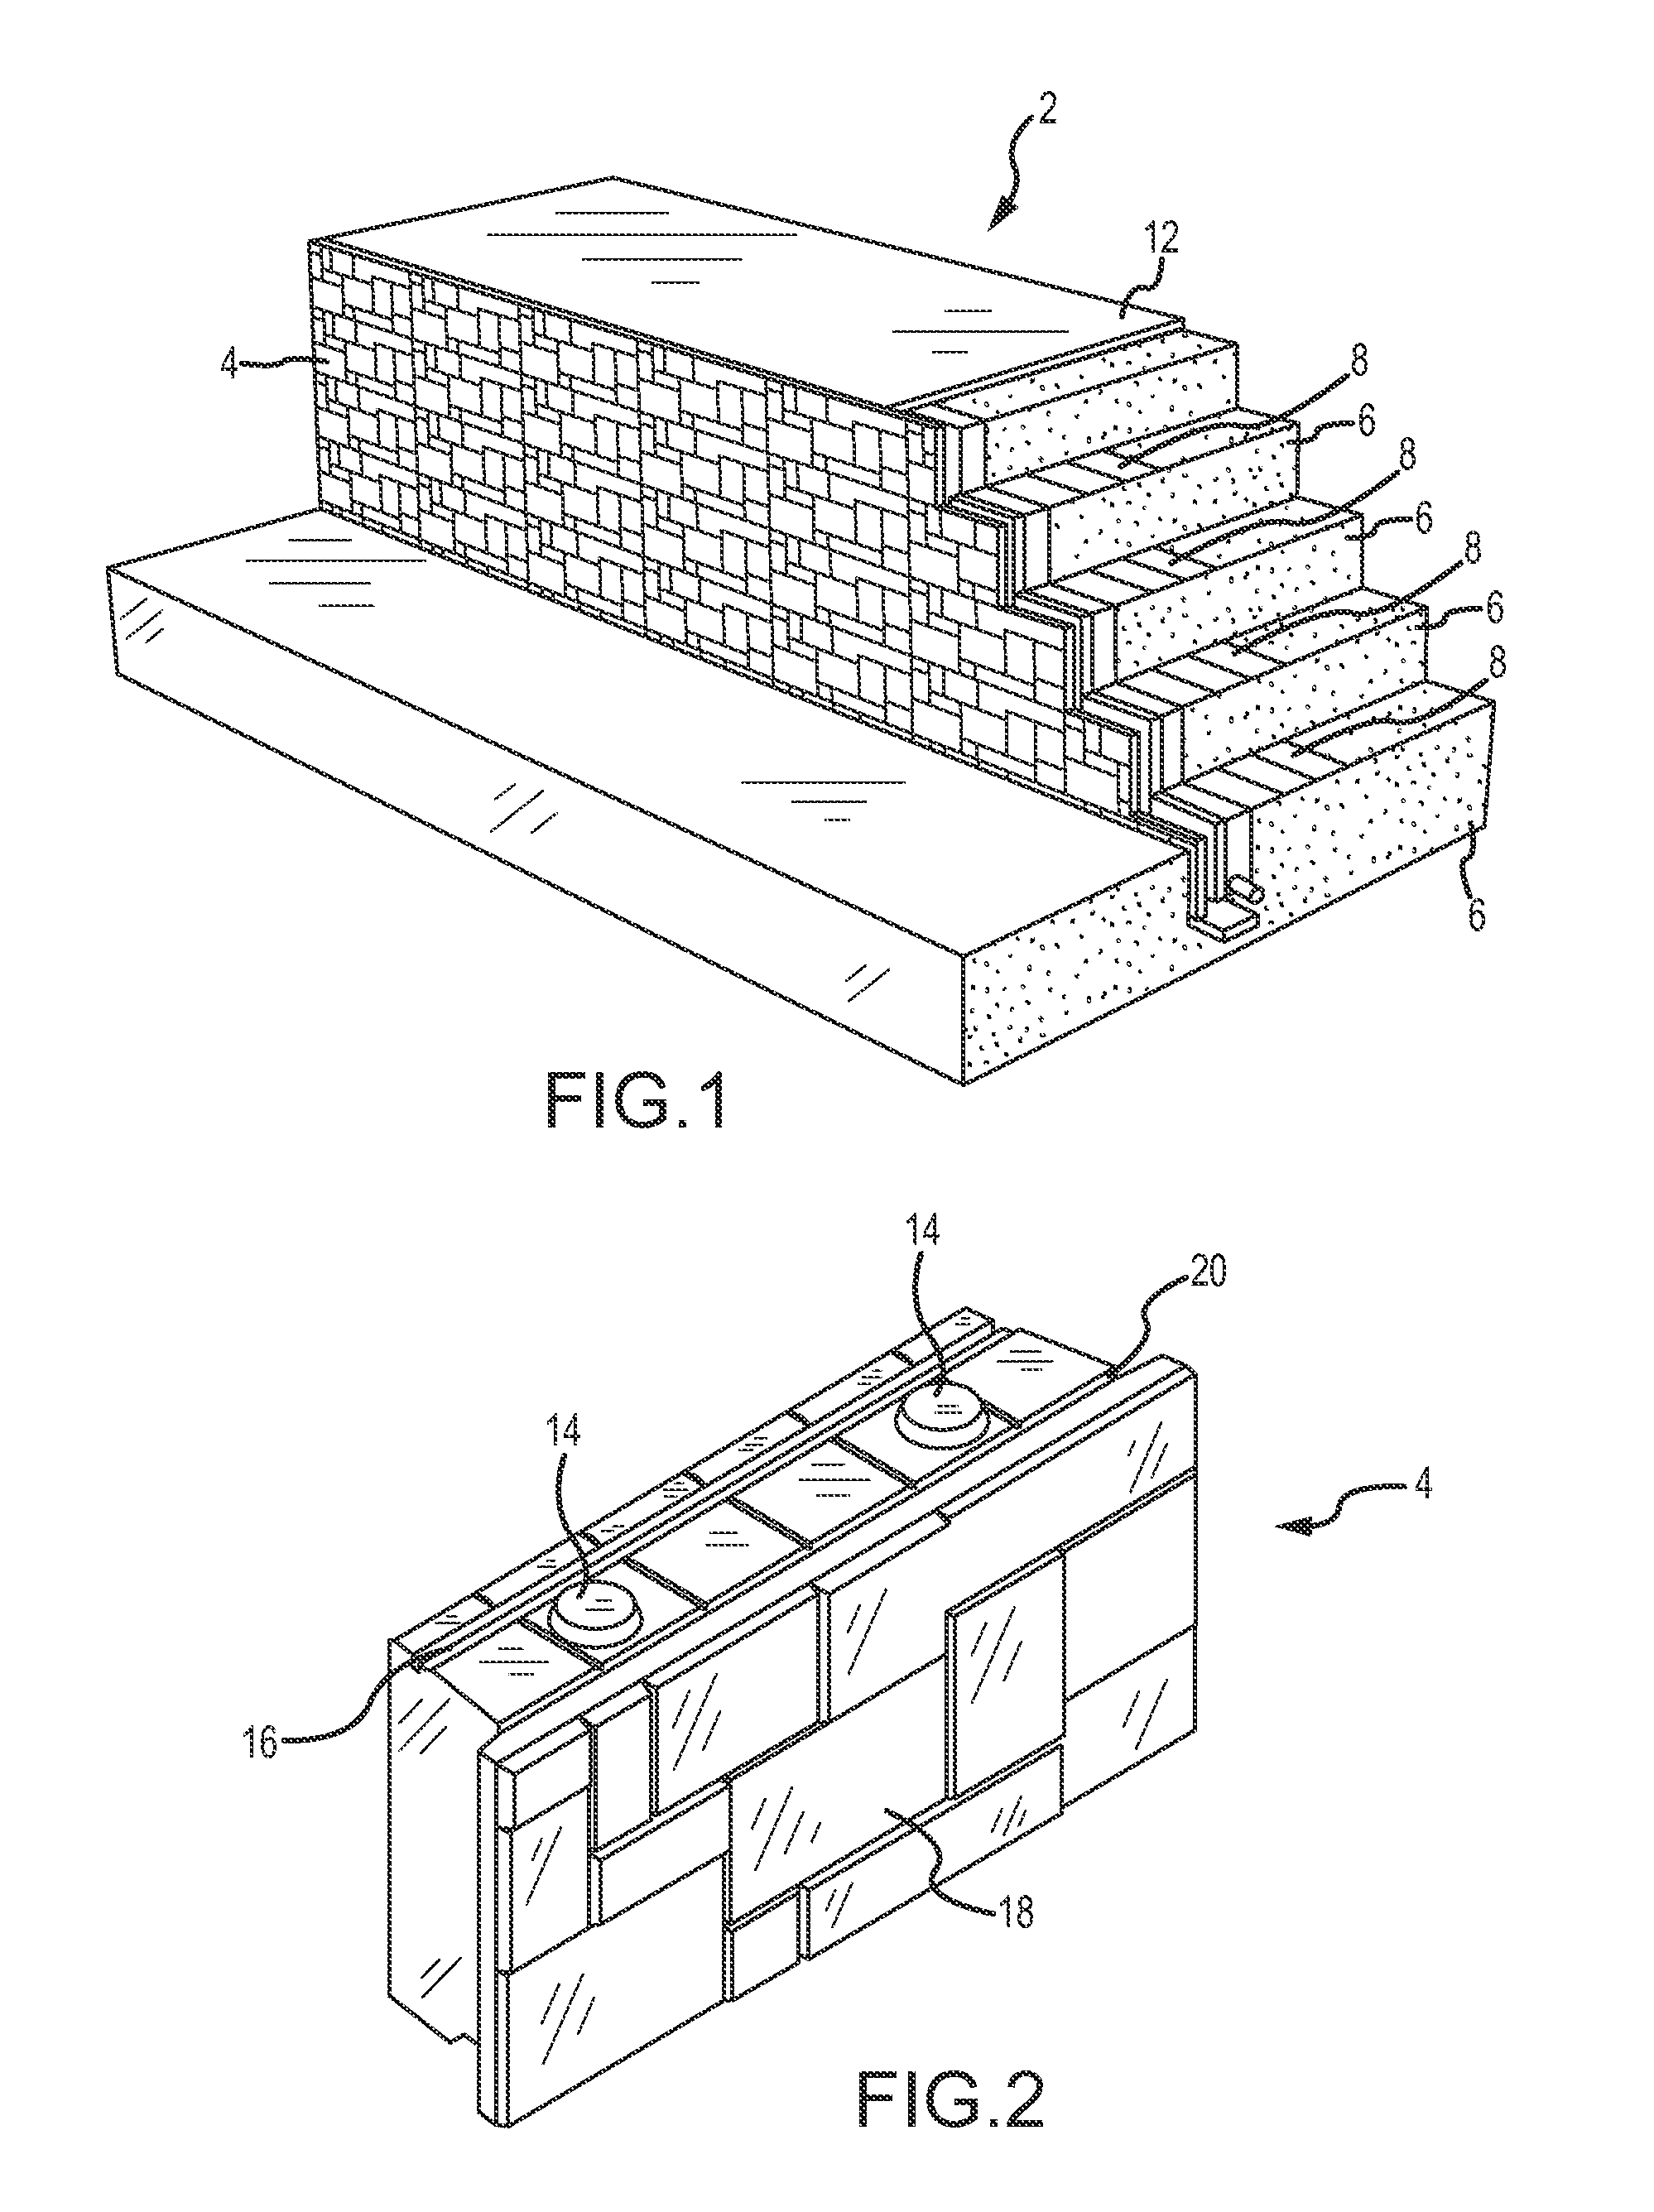 System and method for retaining wall